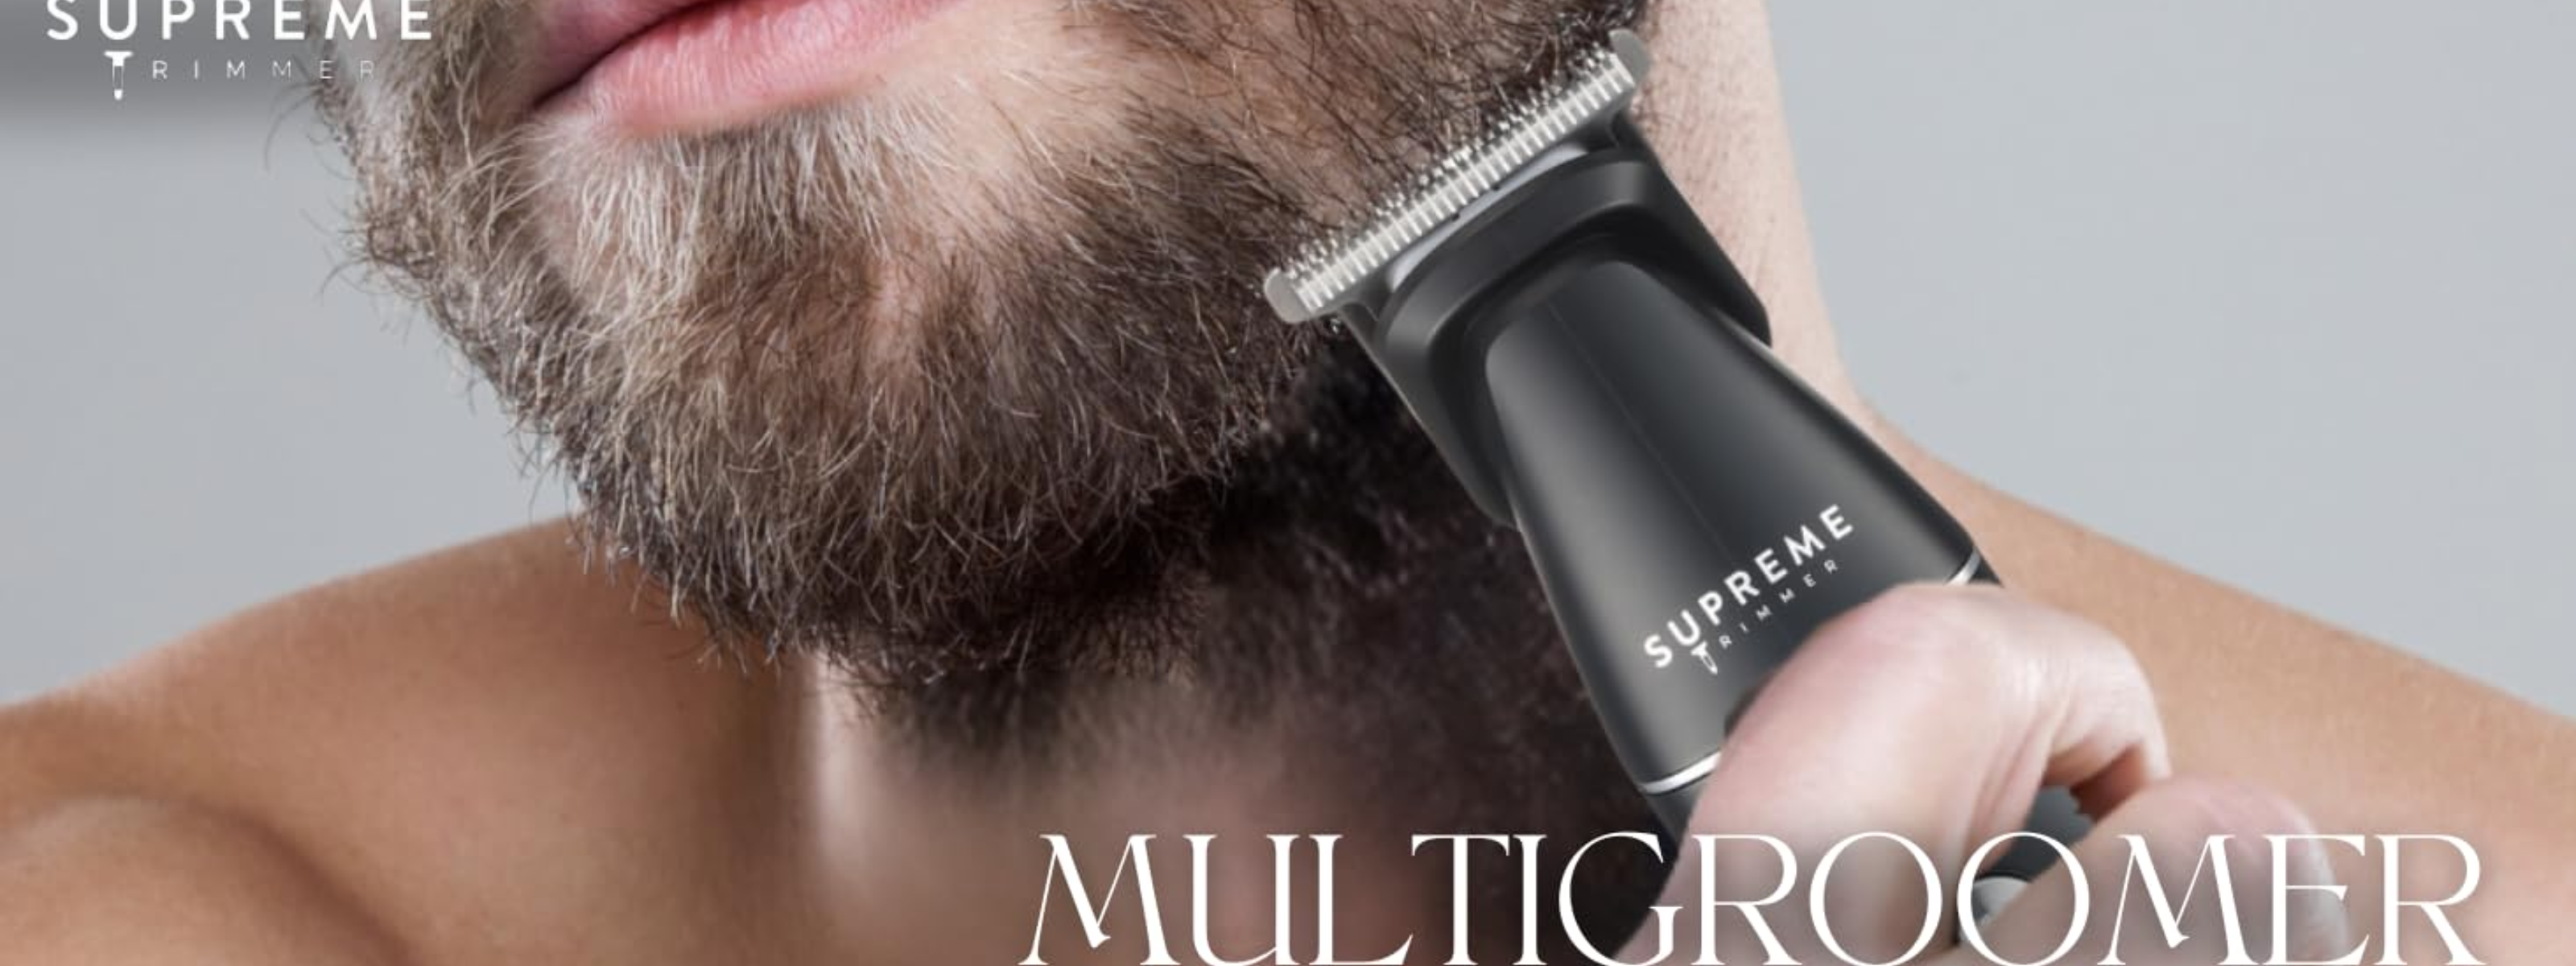 Multigroomers: The Ultimate Grooming Solution for Modern Men